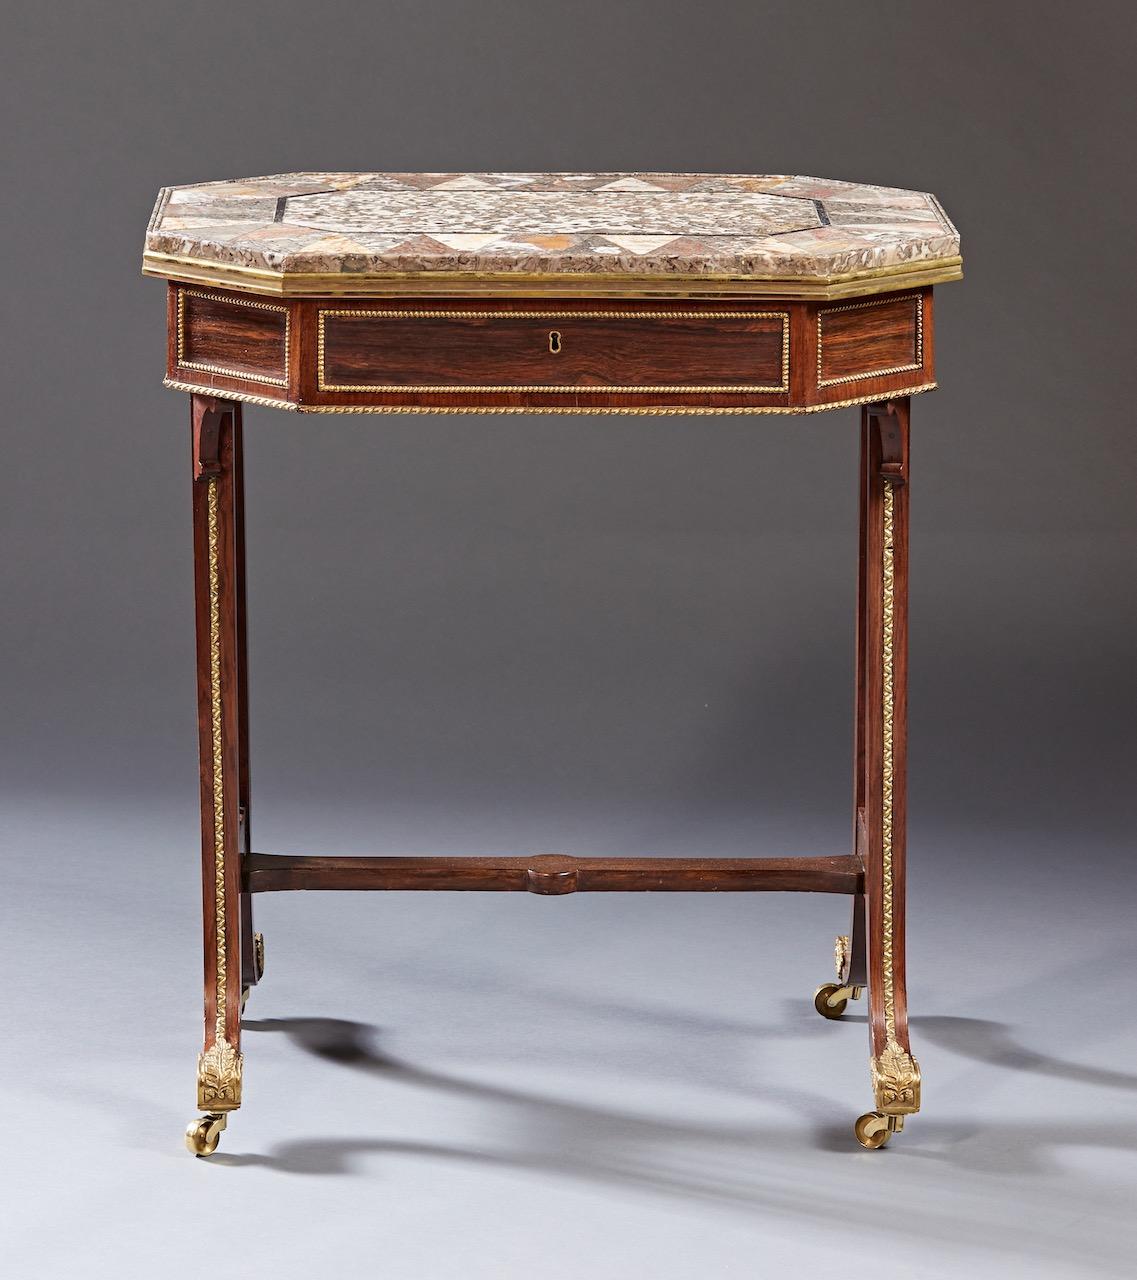 A rare and possibly unique drinks or serving side table attributed to Gillows of London and Lancaster. The specimen inlaid marble top rests on a conforming octagonal shaped case in rosewood with a single drawer on 